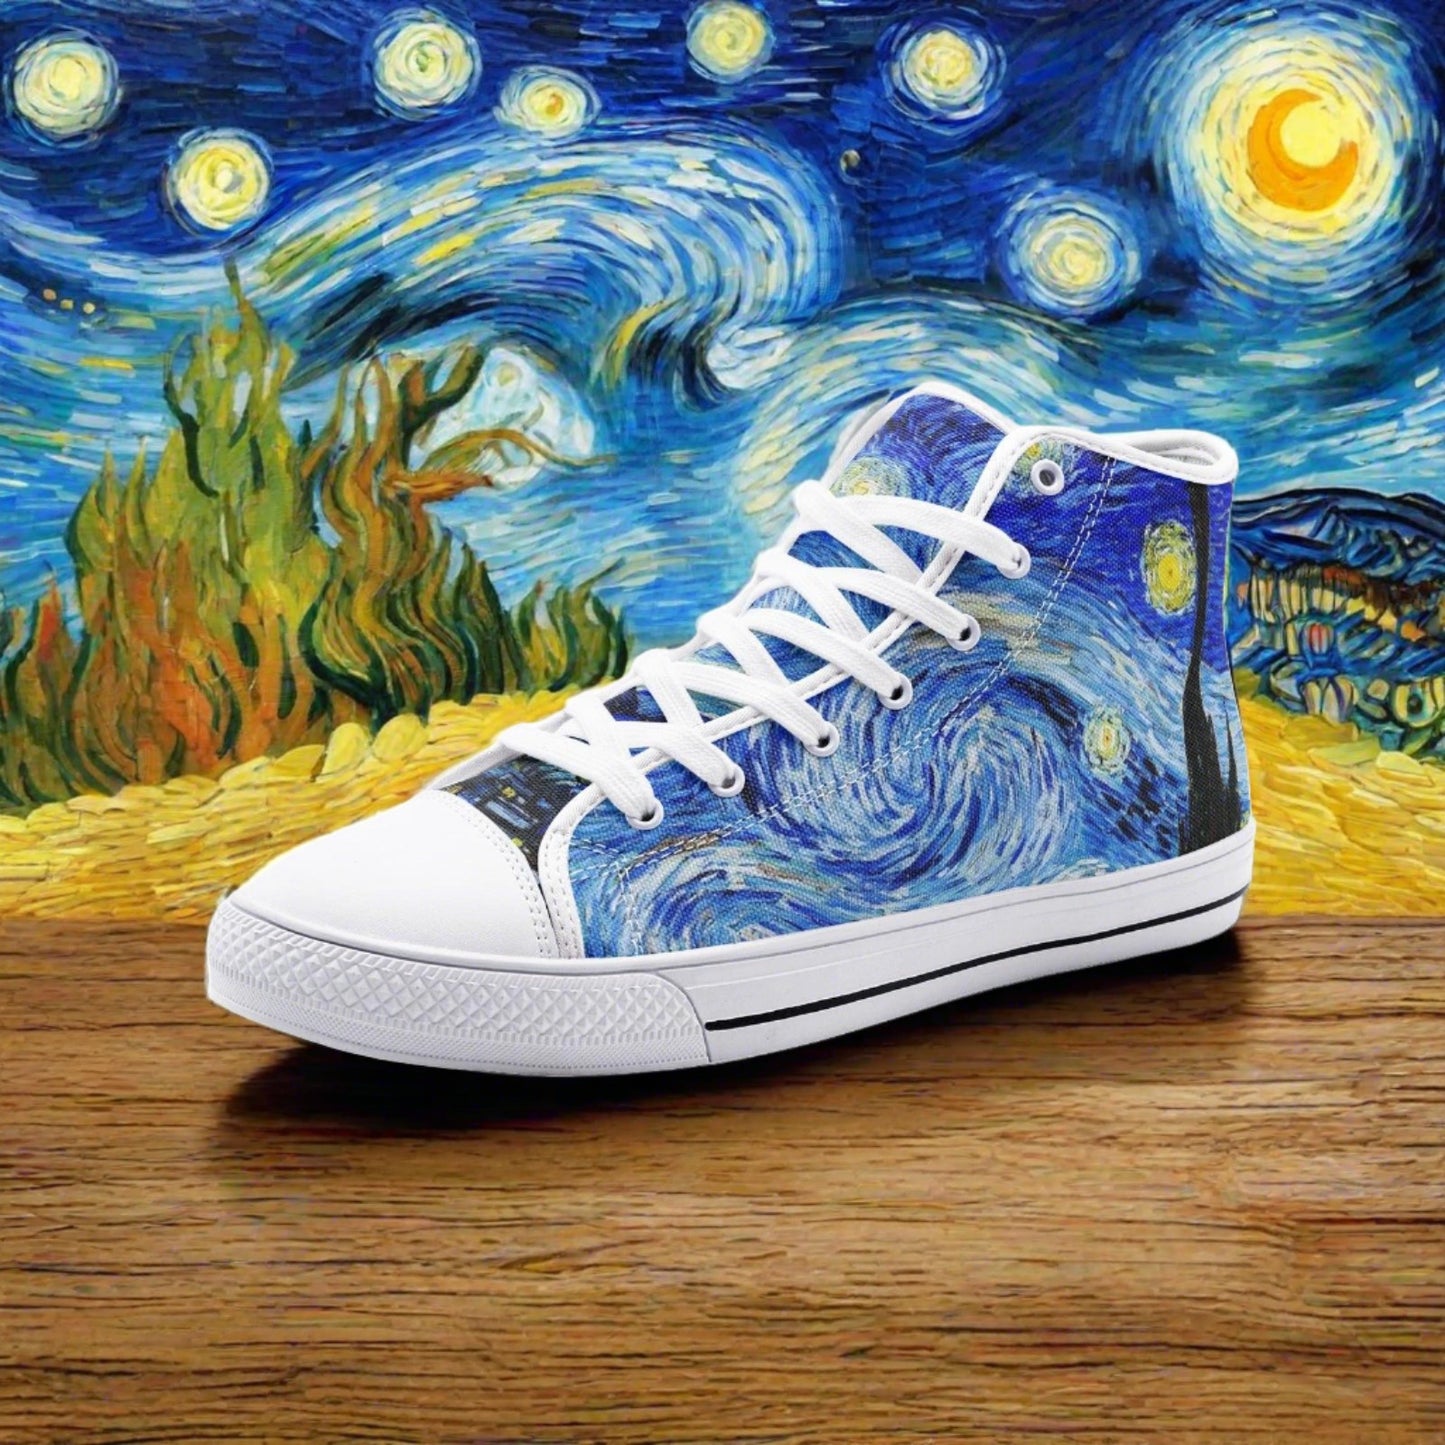 "Starry Night" by Vincent Van Gogh